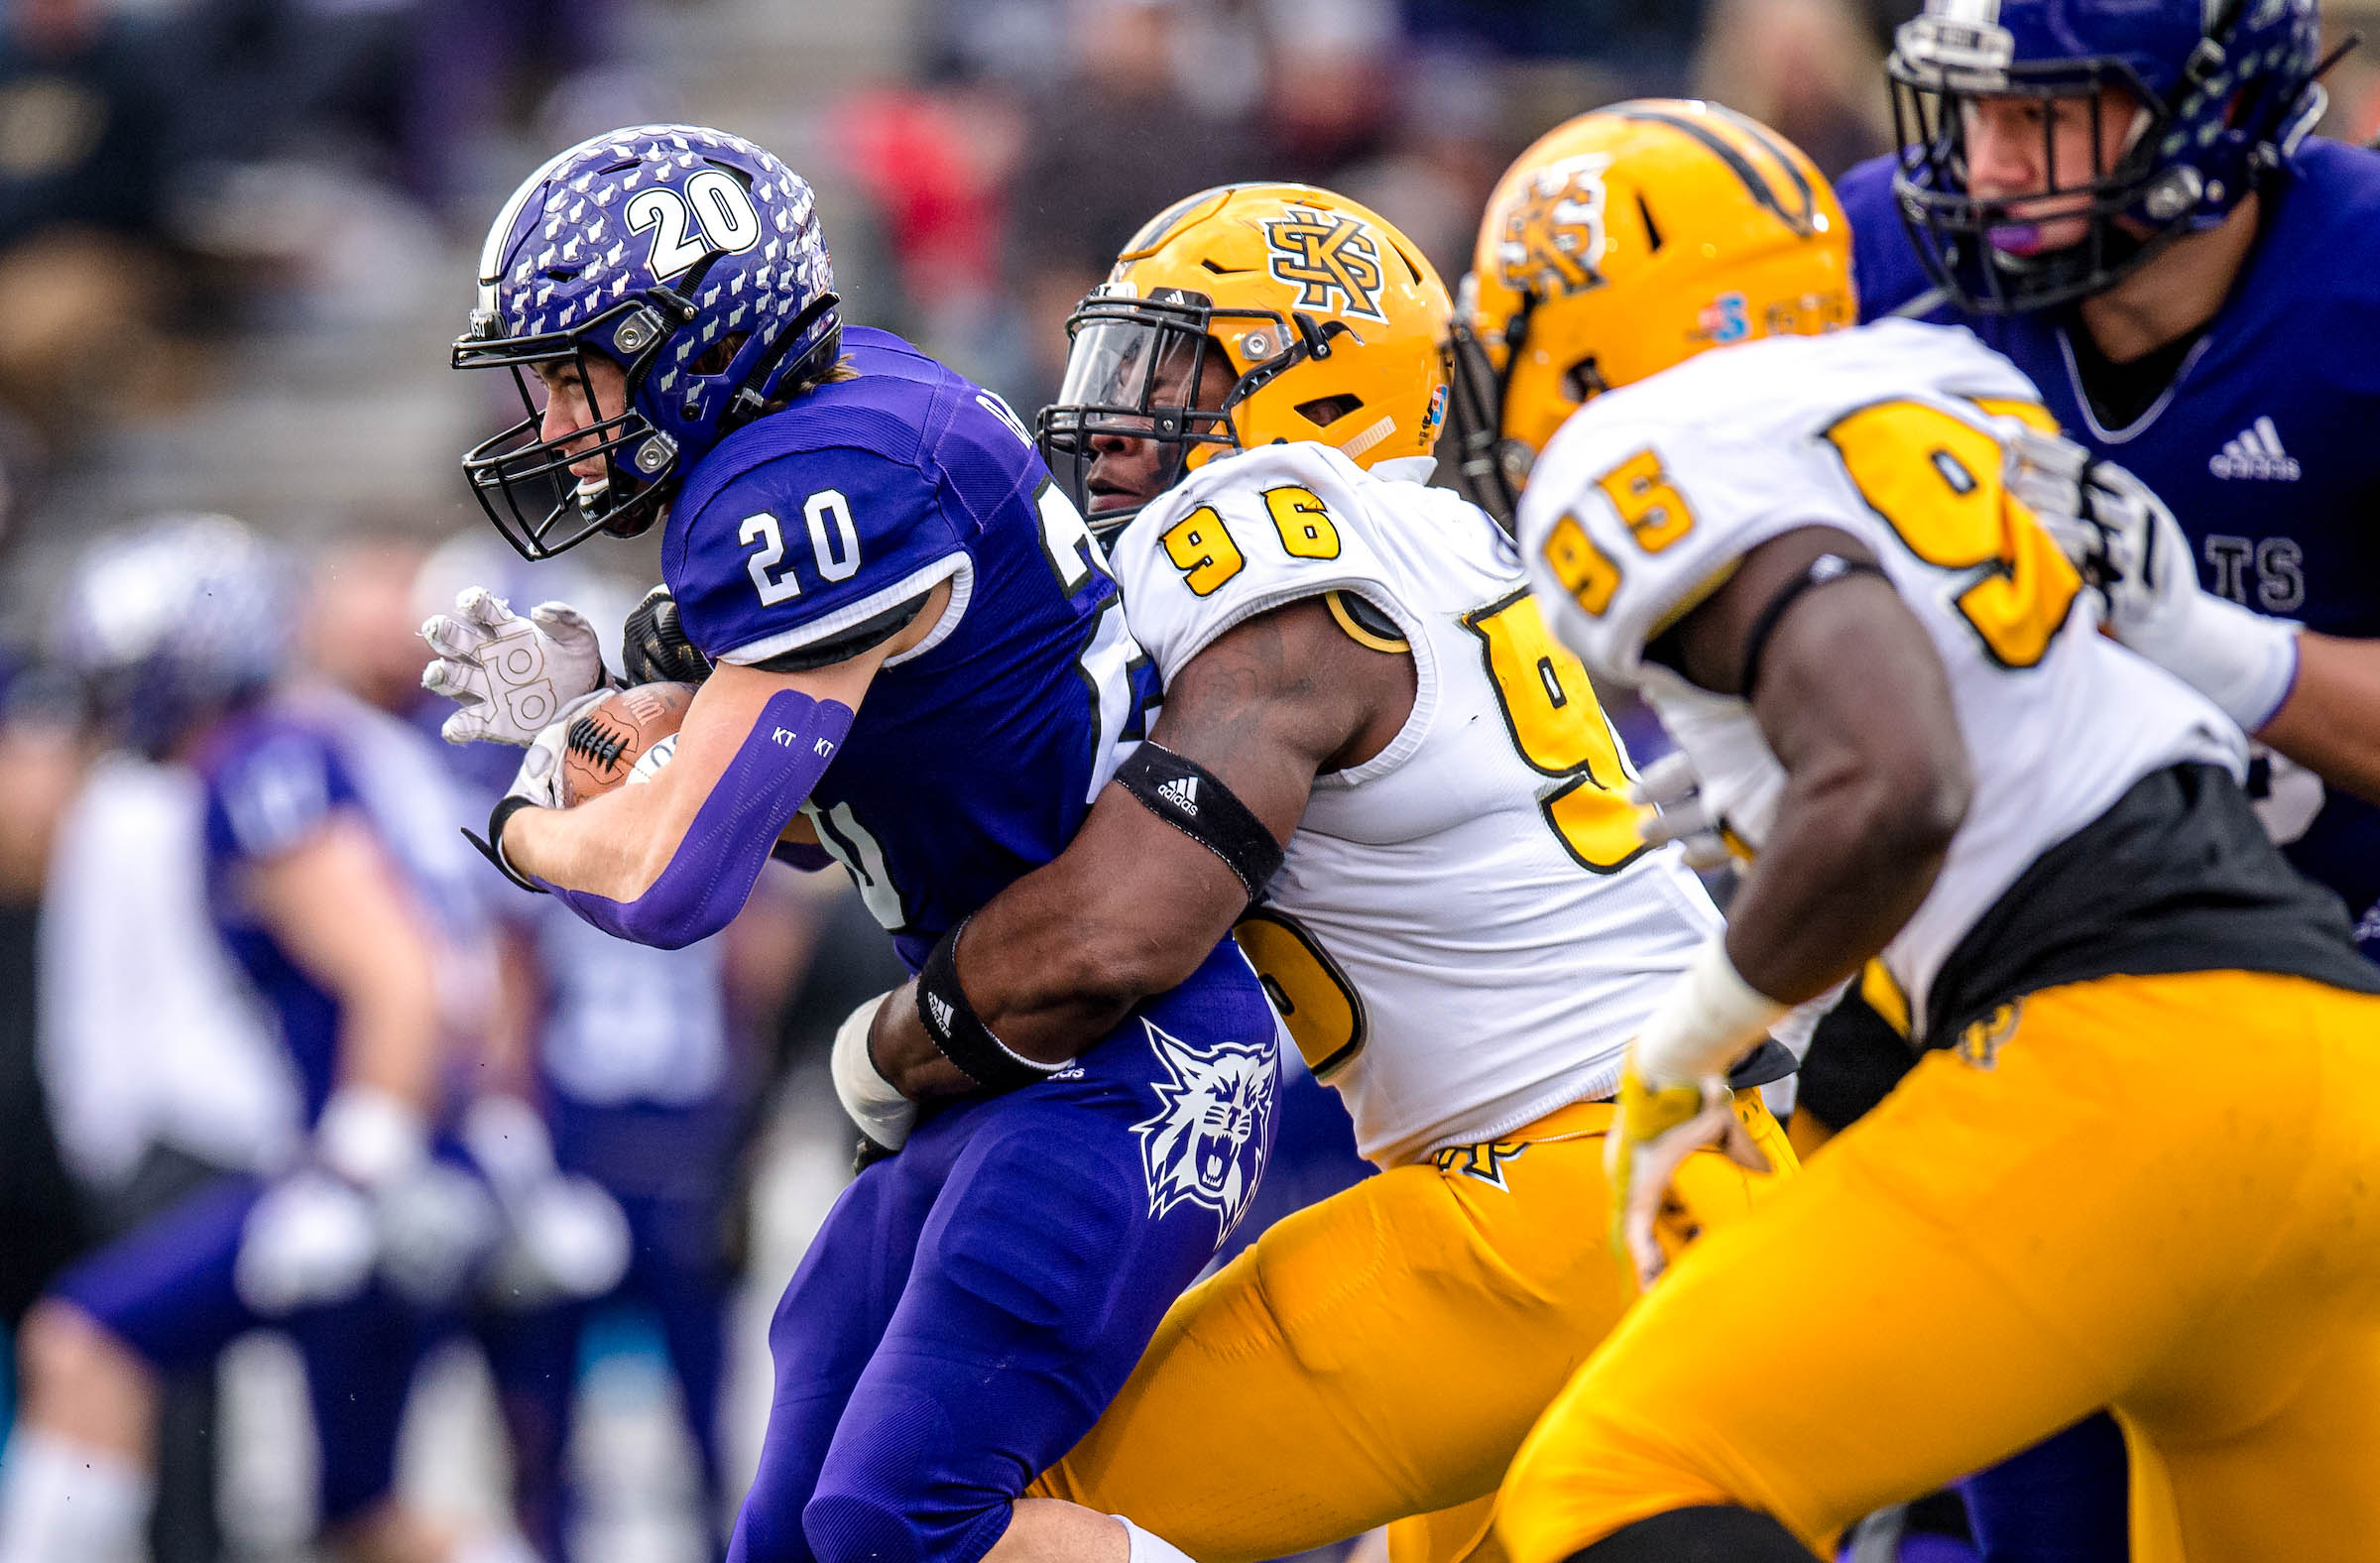 Football shifts focus to recruiting after FCS playoff run